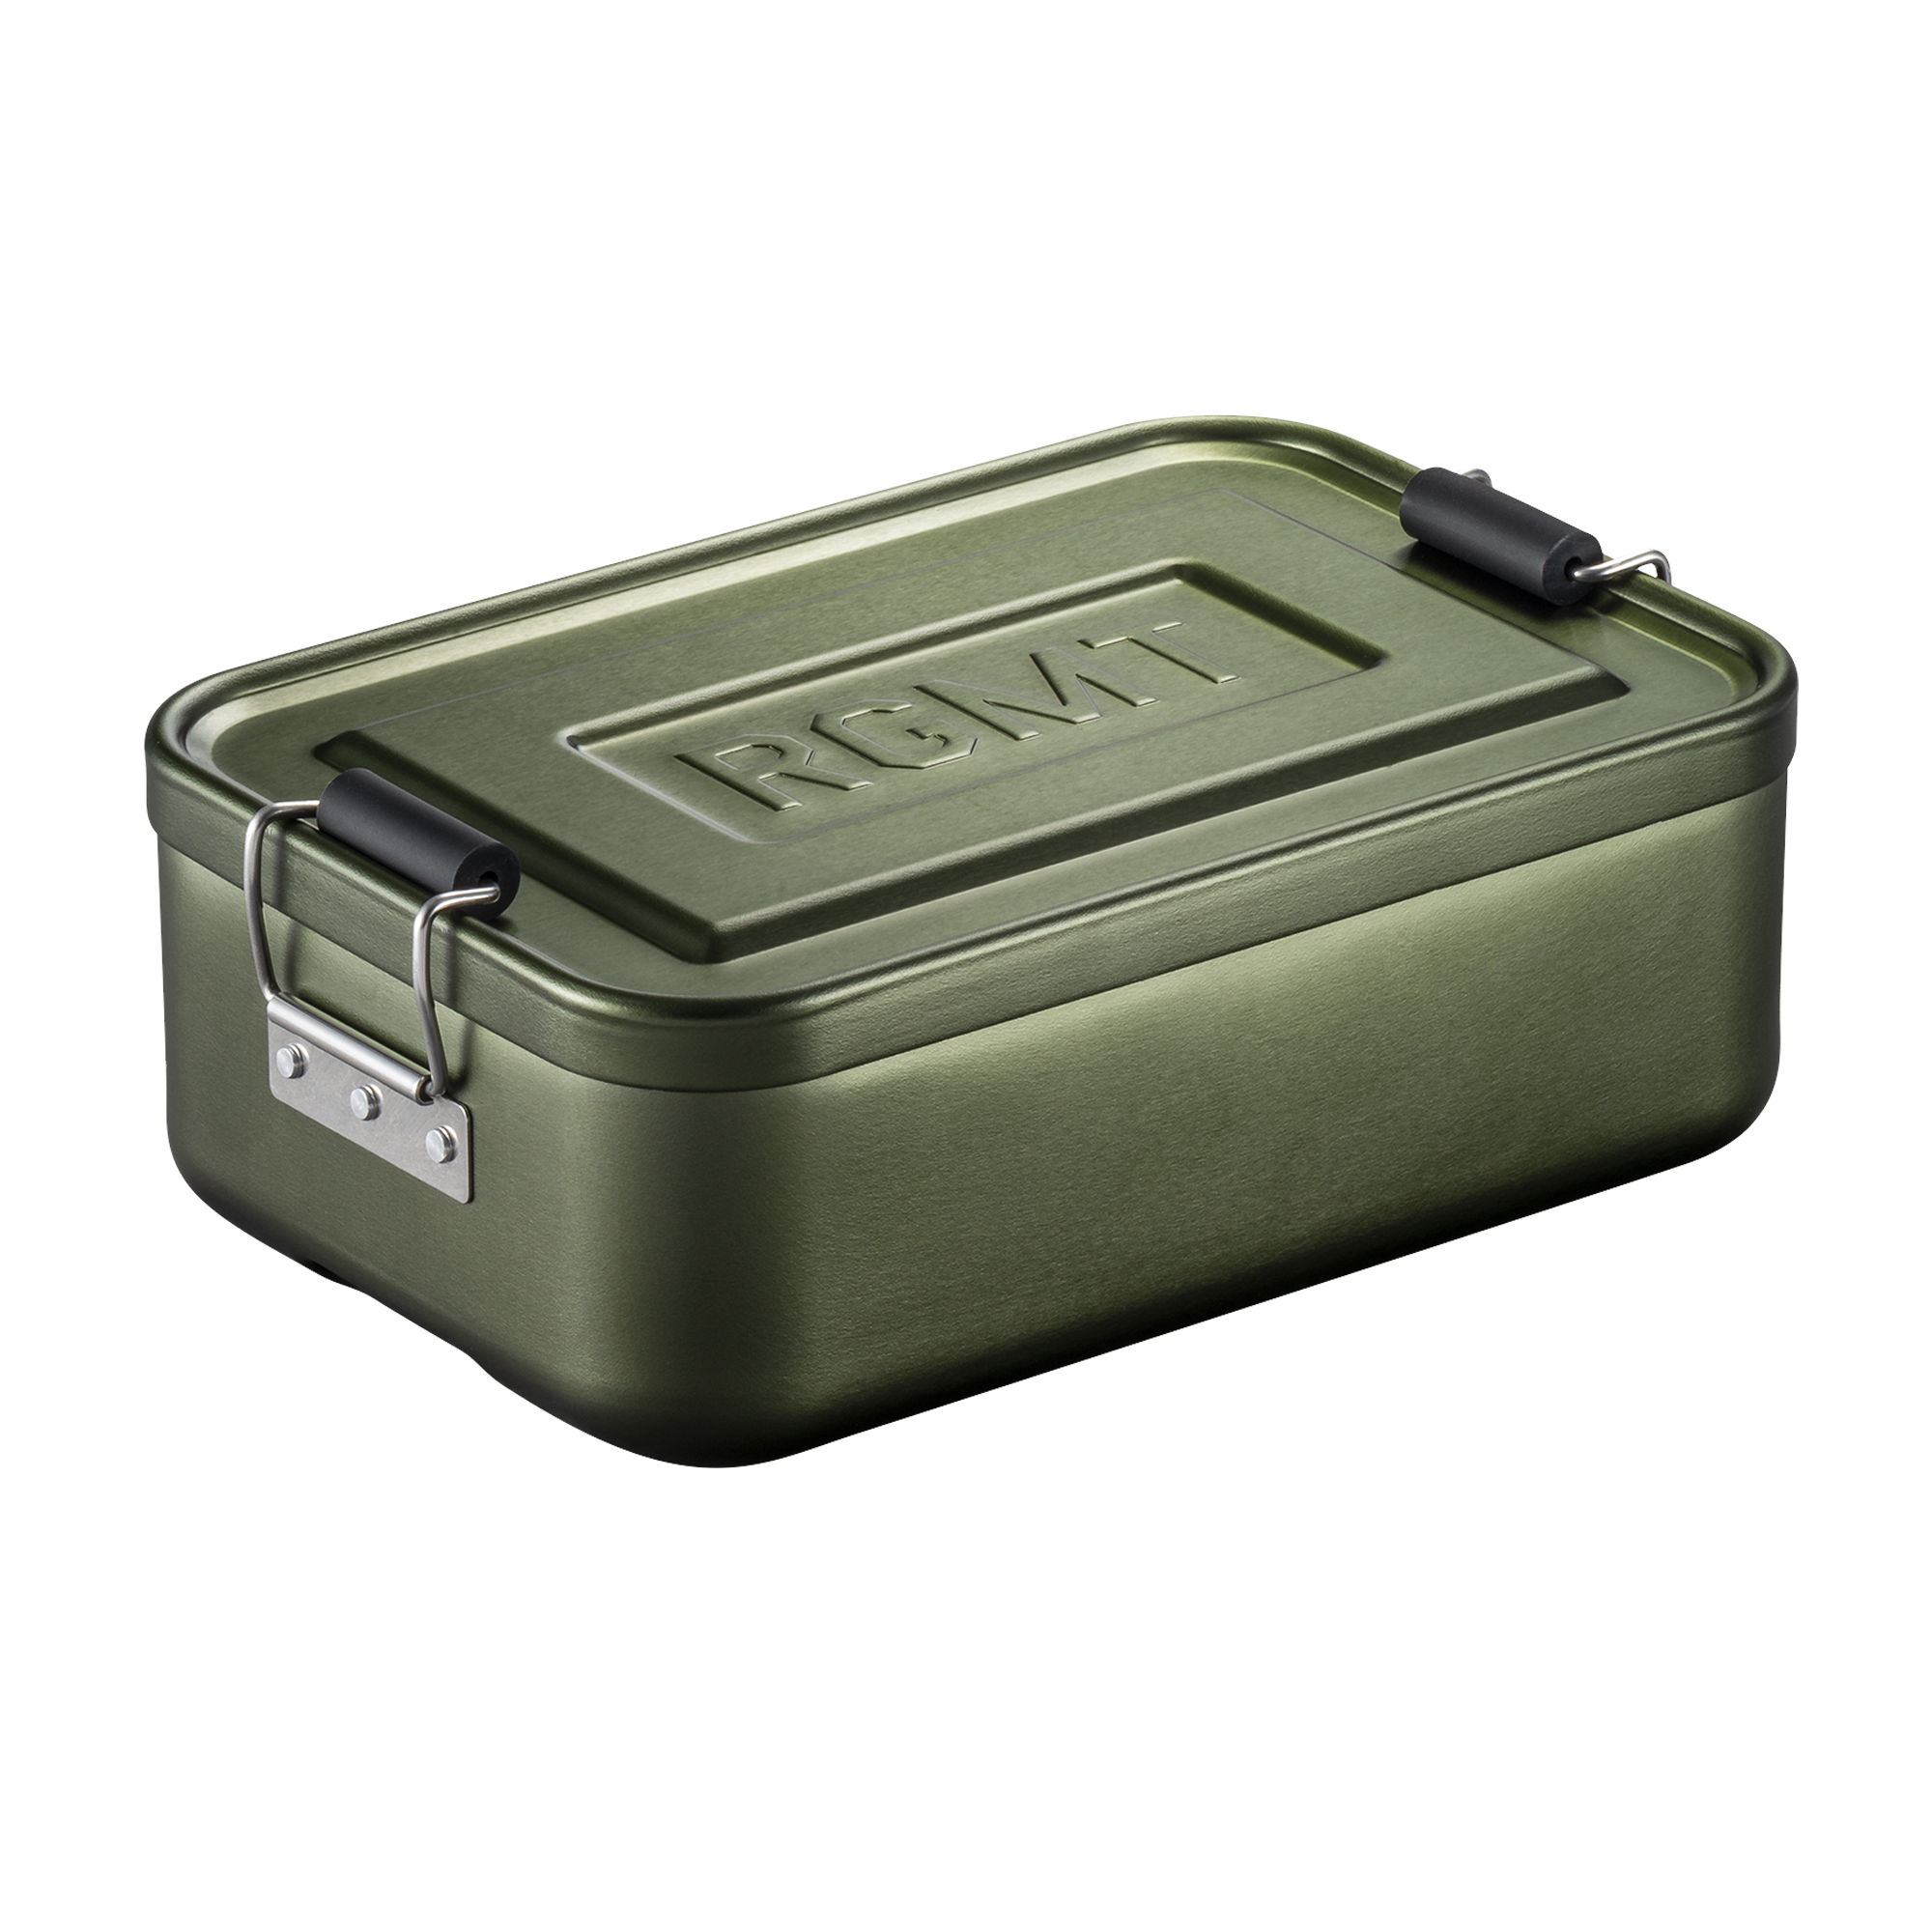 TACTICAL LUNCH BOX